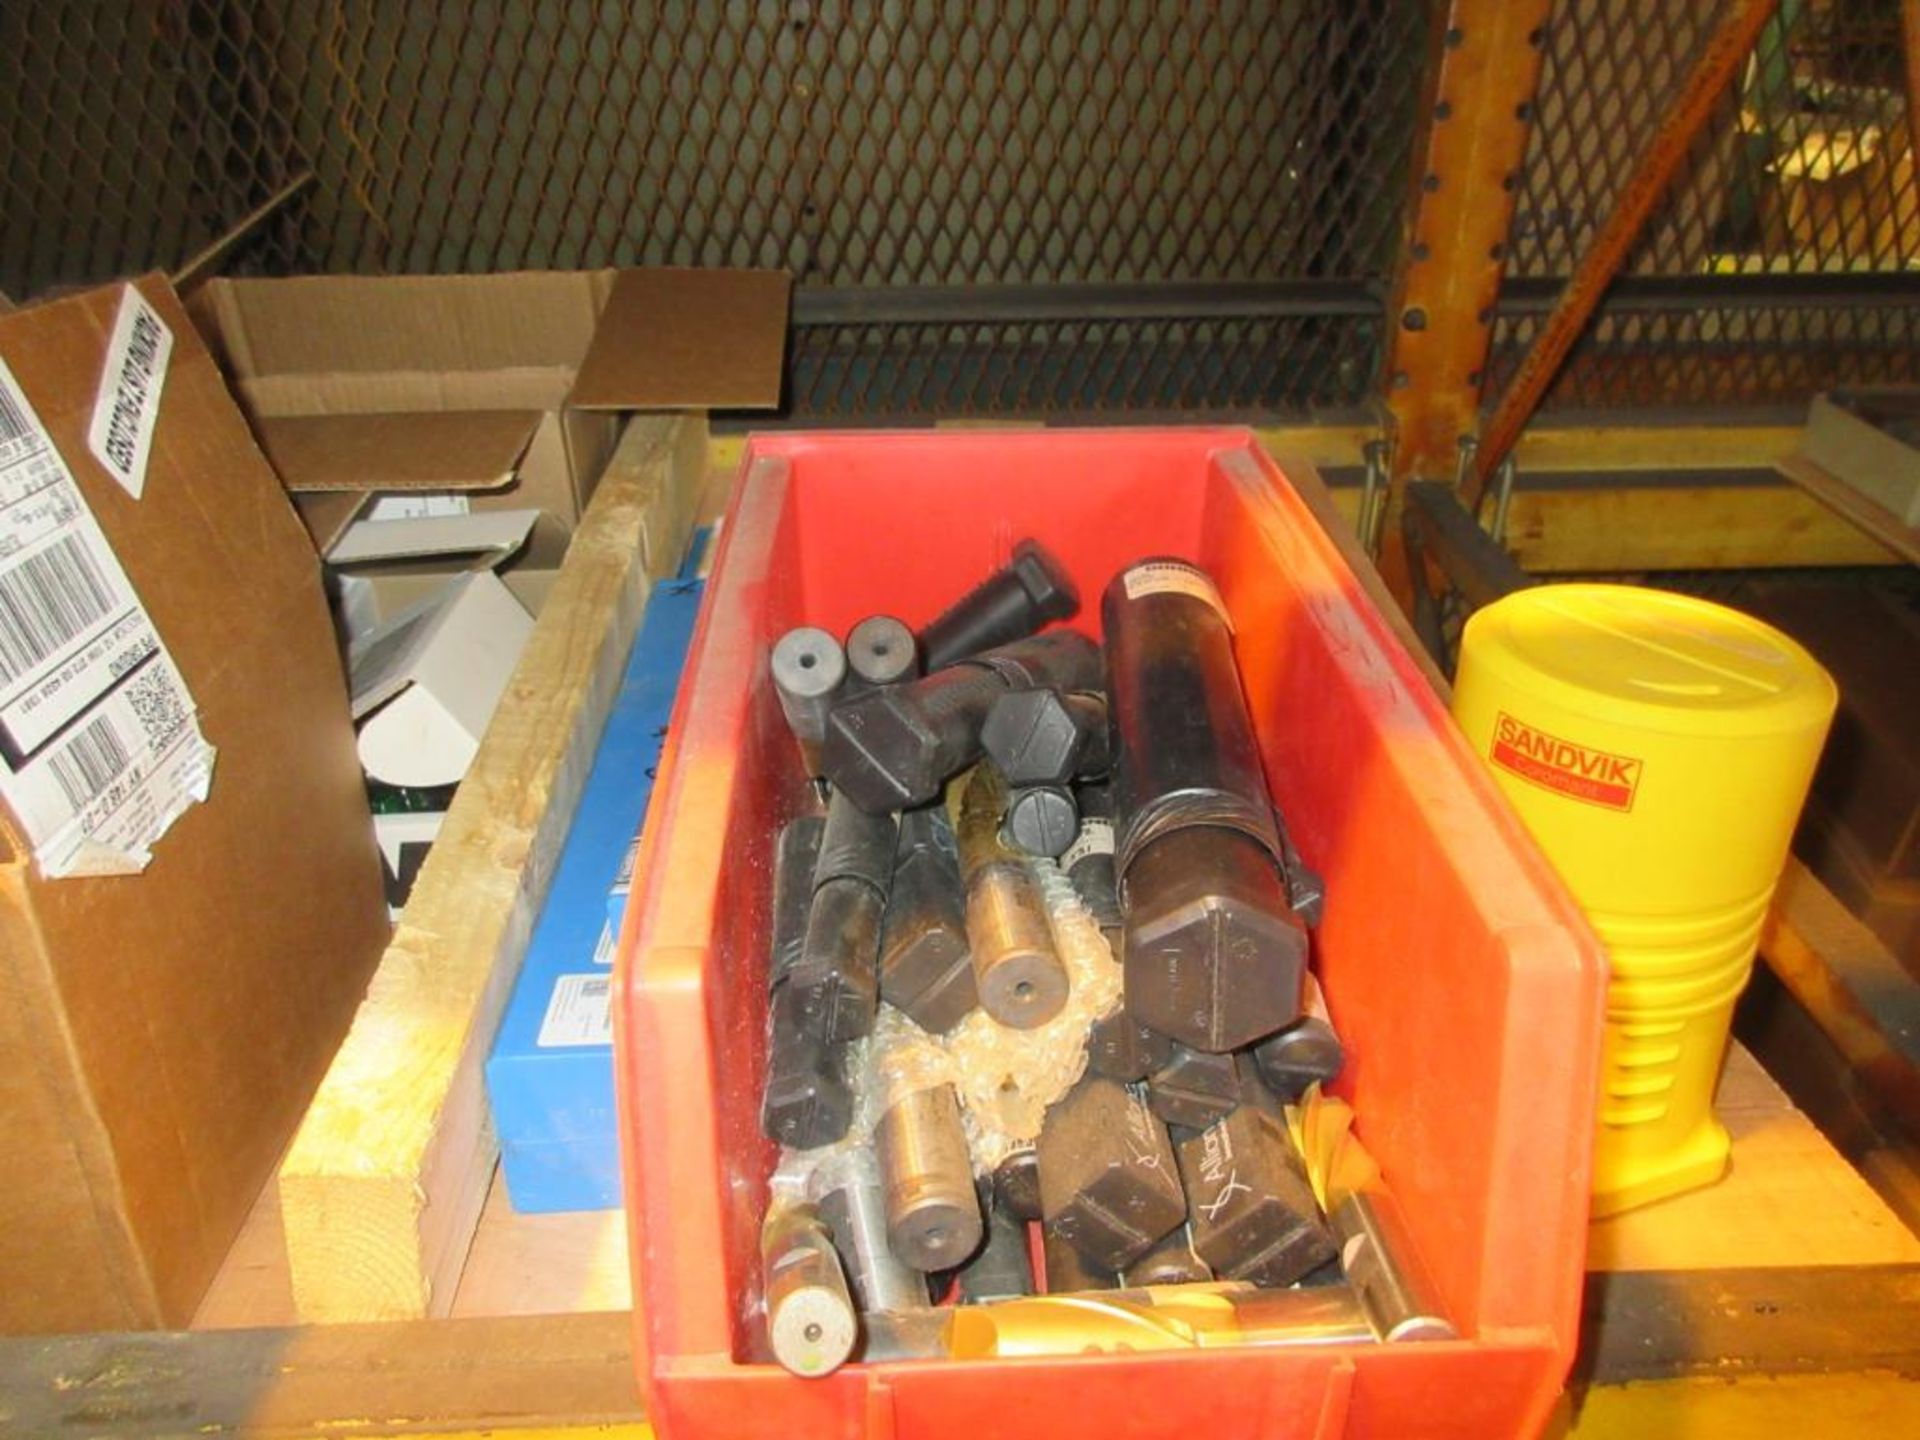 CONTENTS OF (22) SECTIONS PALLET RACK: ASSORTED ABRASIVES, SUNNEN STONES, TOOL BITS, DOVETAIL CUTTER - Image 13 of 43